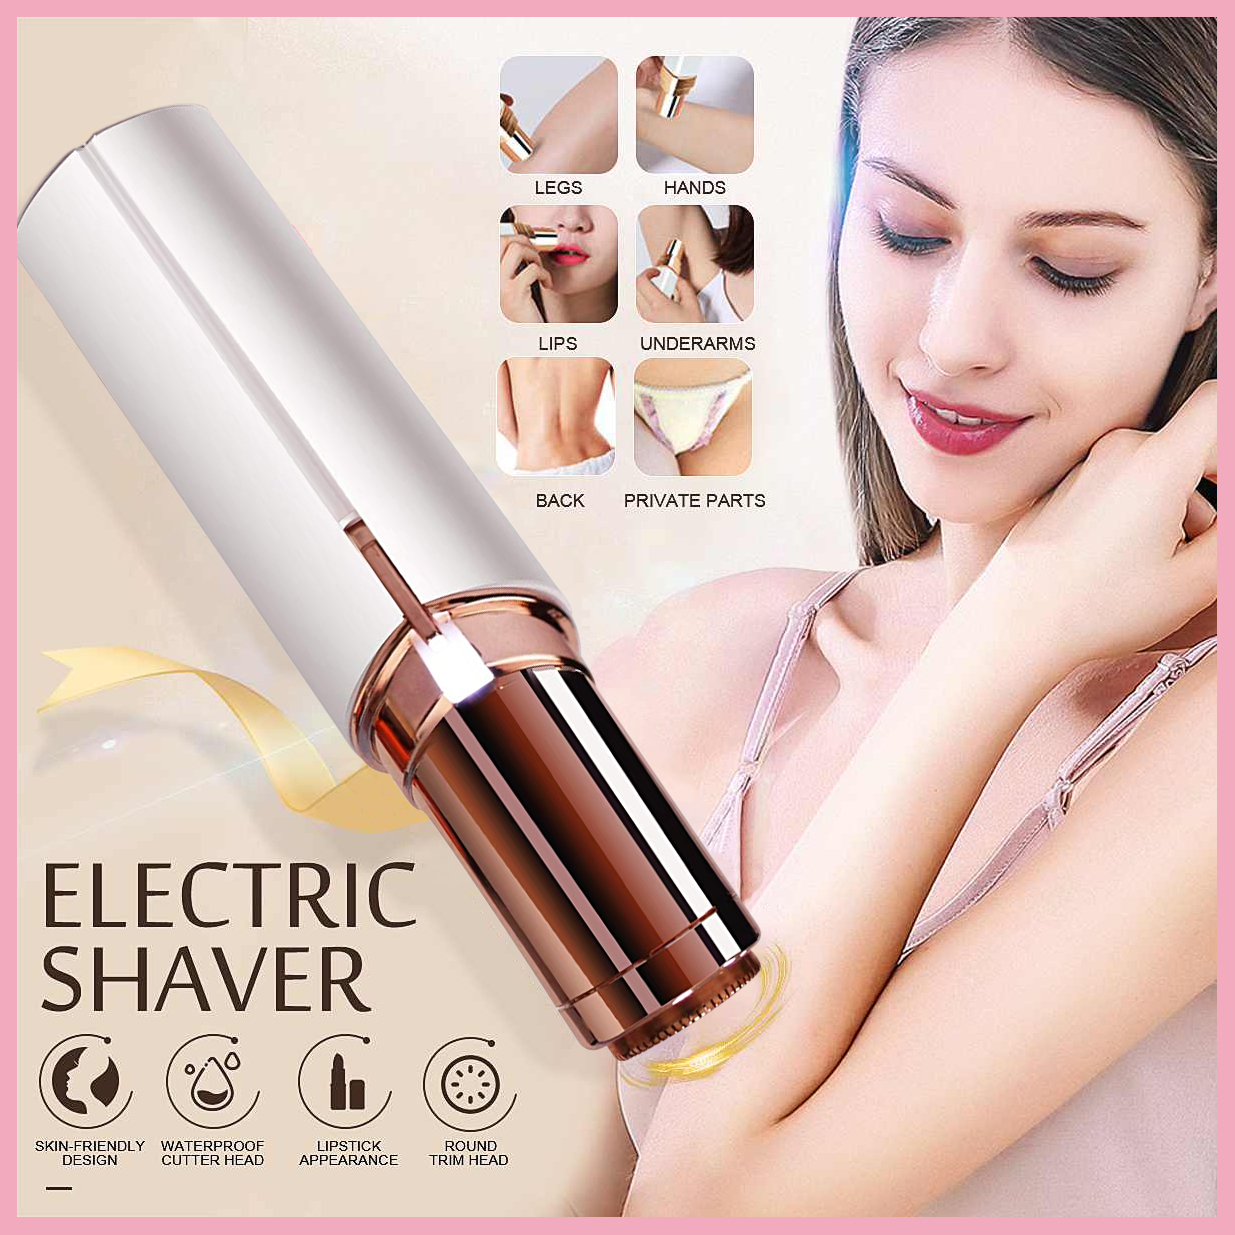 New Design] Facial Body Hair Remover for Women, Mini Lipstick Hair Epilator  for Smooth Skin & Makeup, Full Hair Removal for Face Arms Legs Beauty Peach  Fuzz, Painless Electric Hair Shaver for